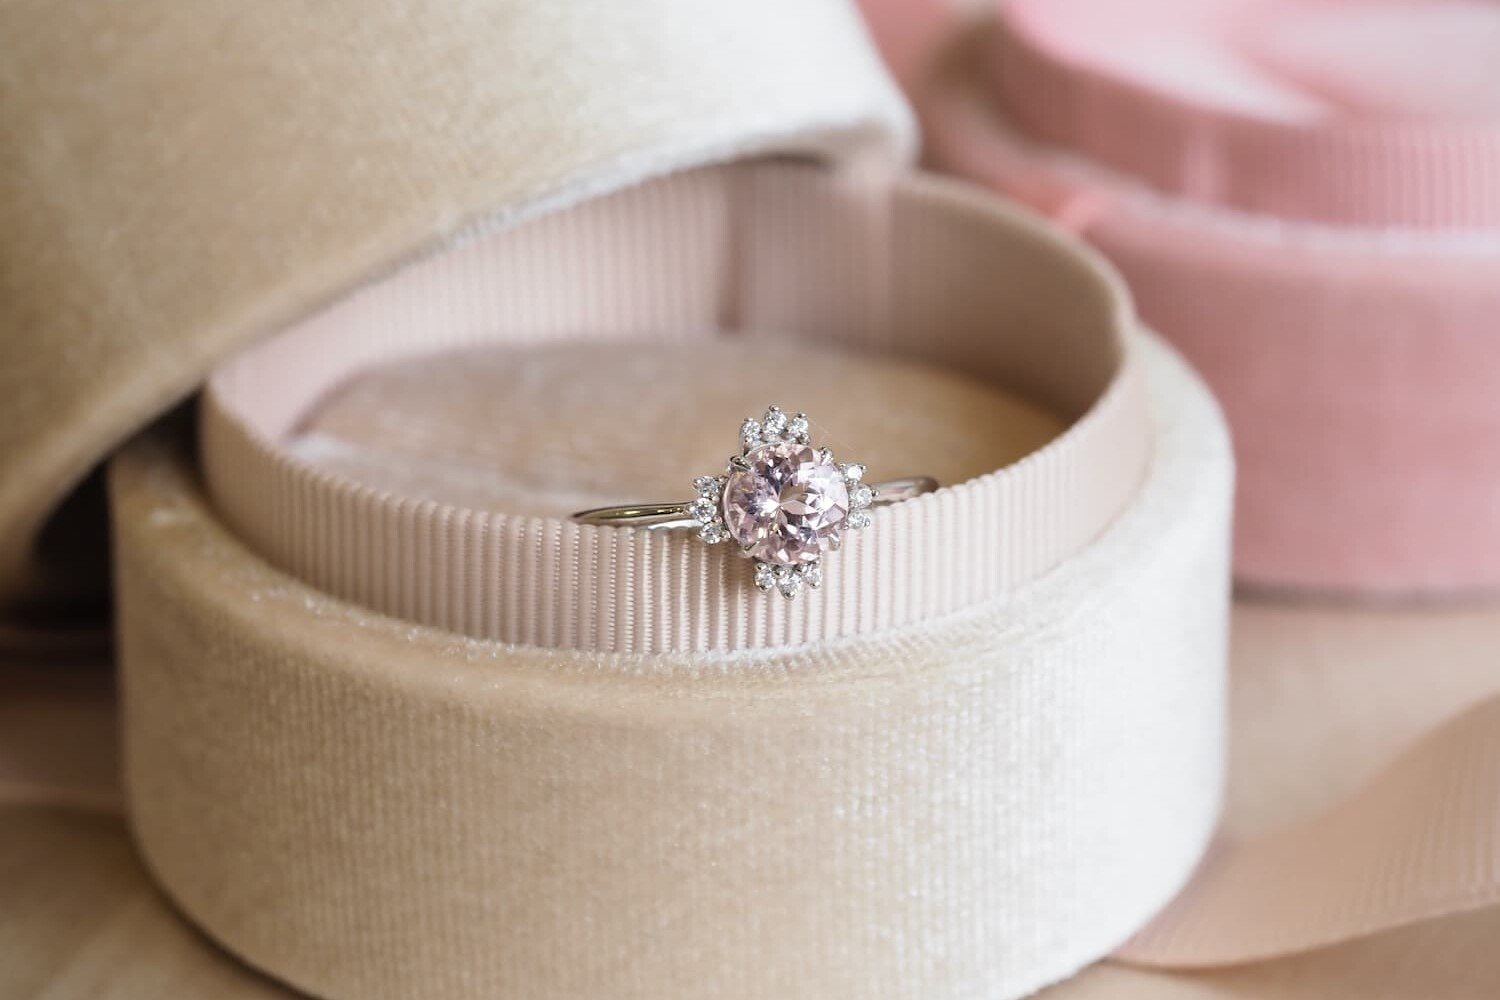 Morganite engagement rings Chandelier design with diamonds